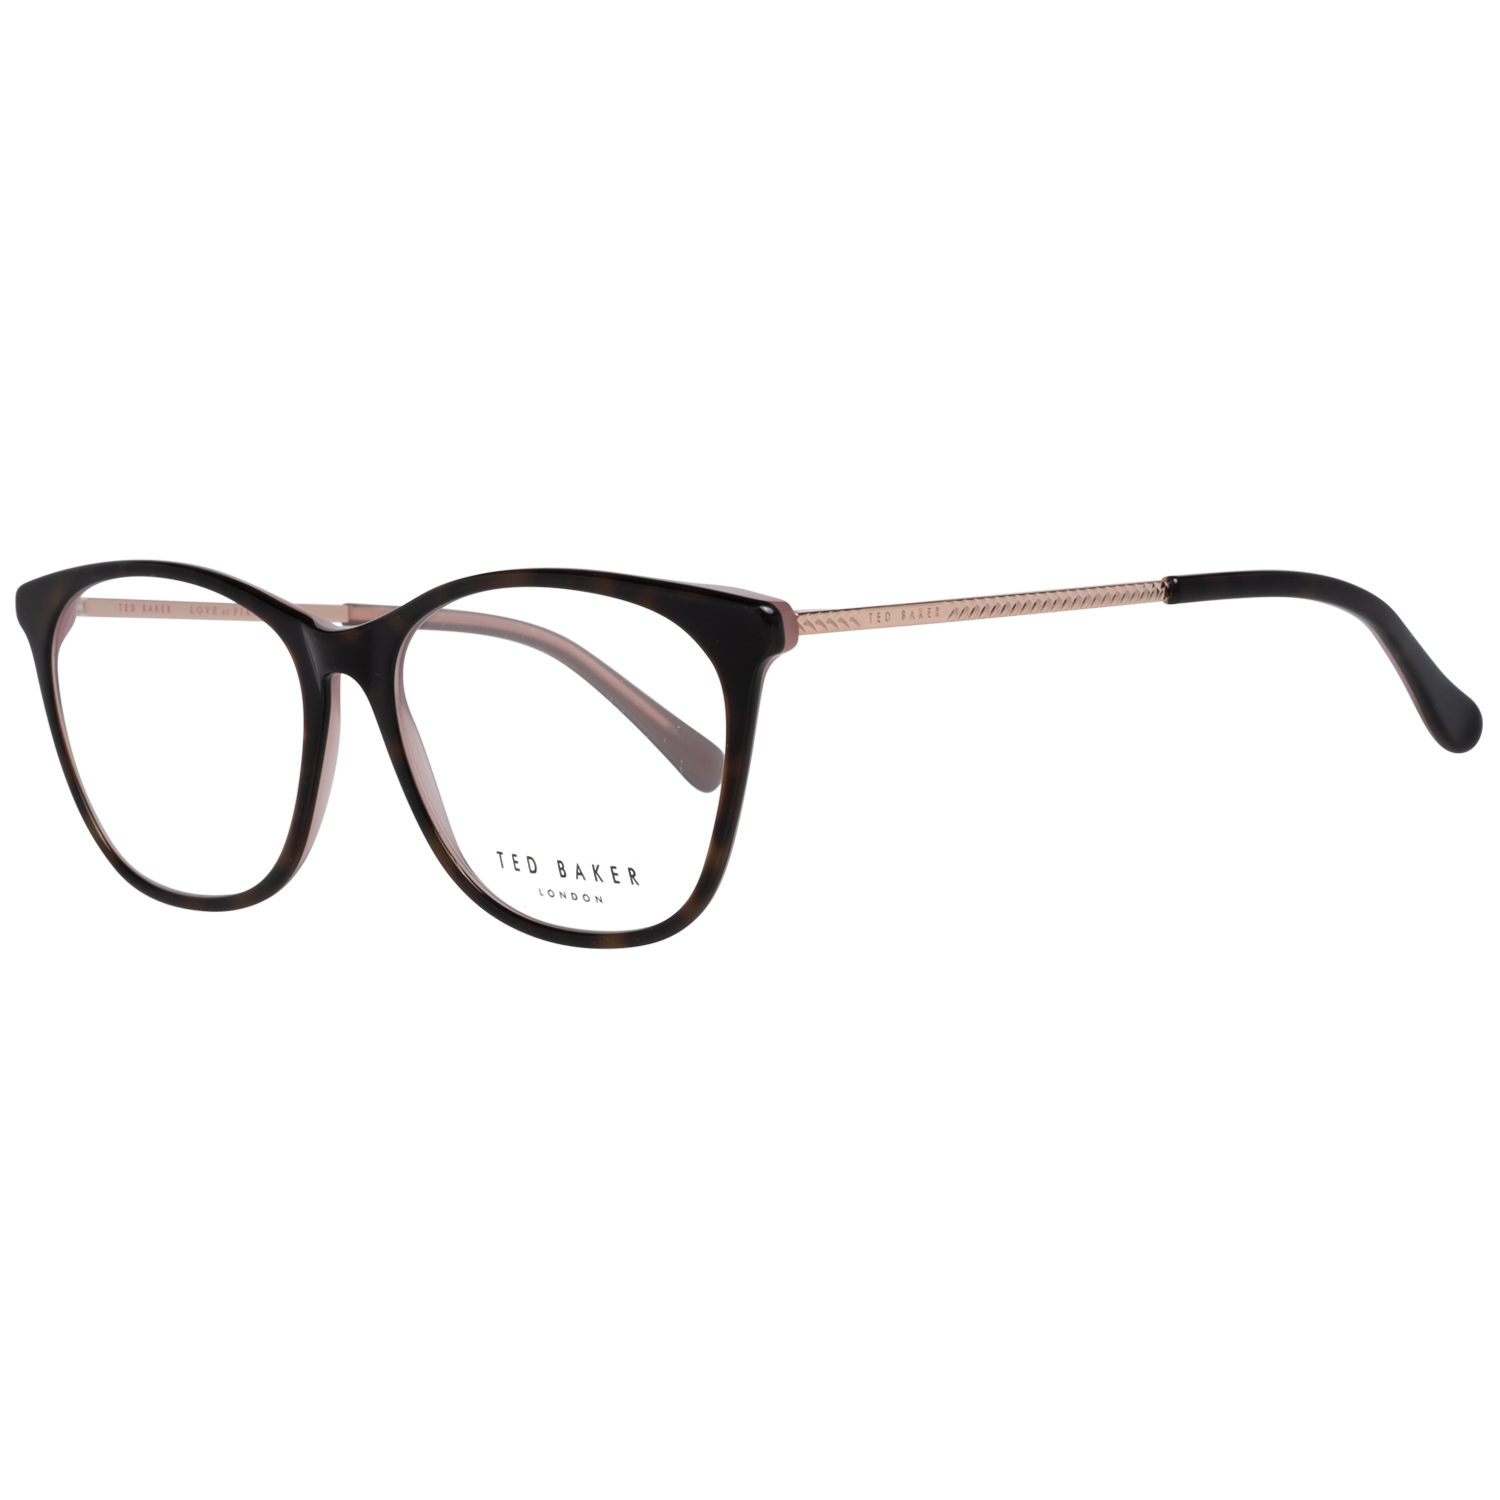 GenderWomenMain colorBrownFrame colorBrownFrame materialPlasticSize53-16-140Lenses width53mmLenses heigth42mmBridge length16mmFrame width138mmTemple length140mmShipment includesCase, Cleaning clothStyleFull-RimSpring hingeNo